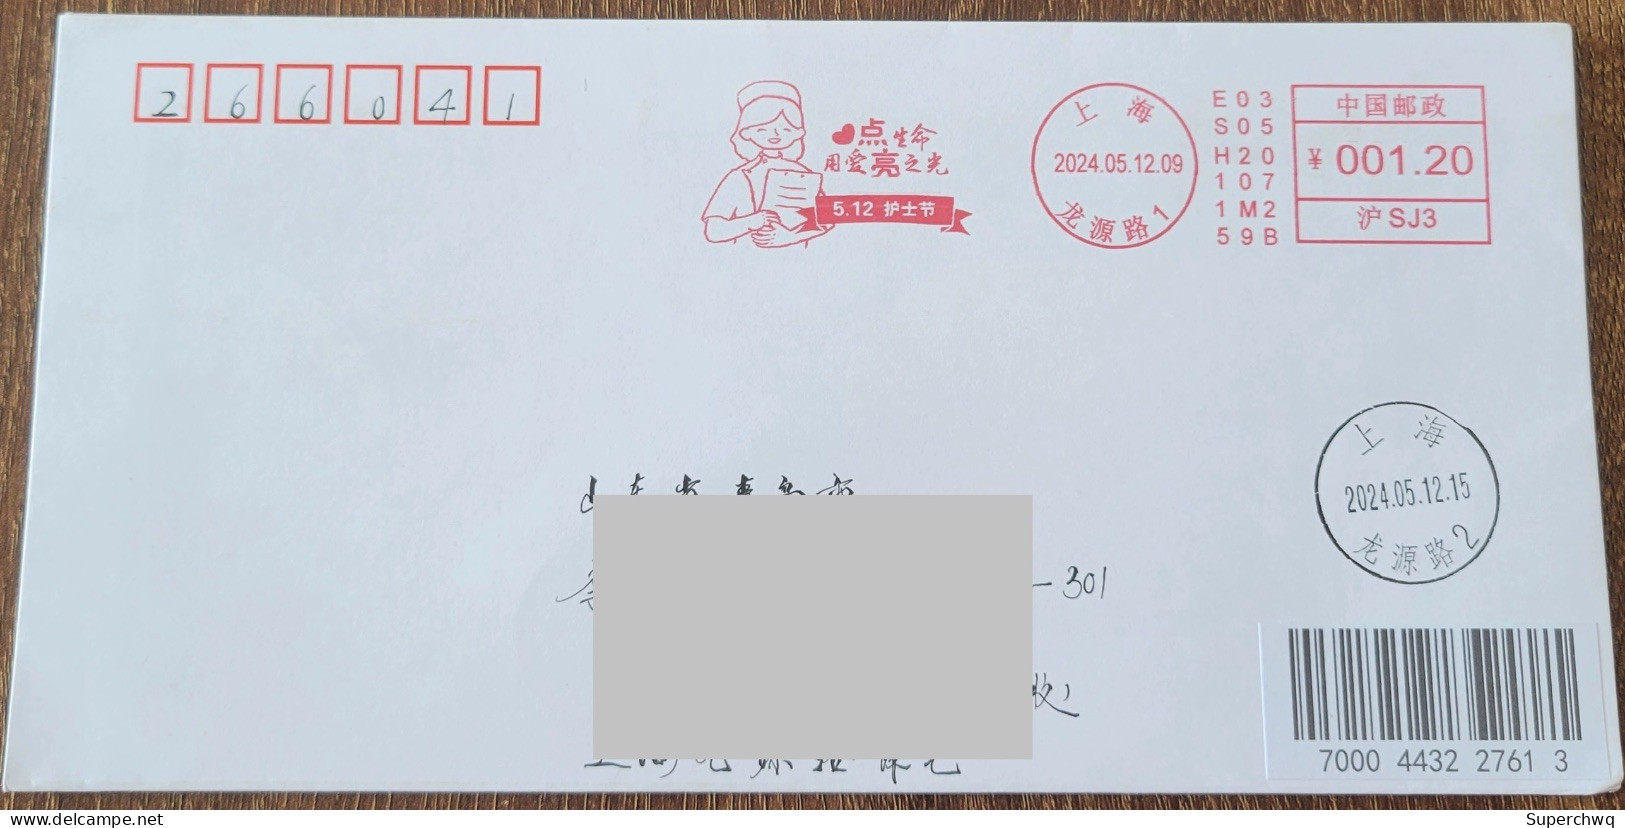 China Cover Nurse's Day (Shanghai) Postage Machine Stamp First Day Actual Delivery Seal - Sobres